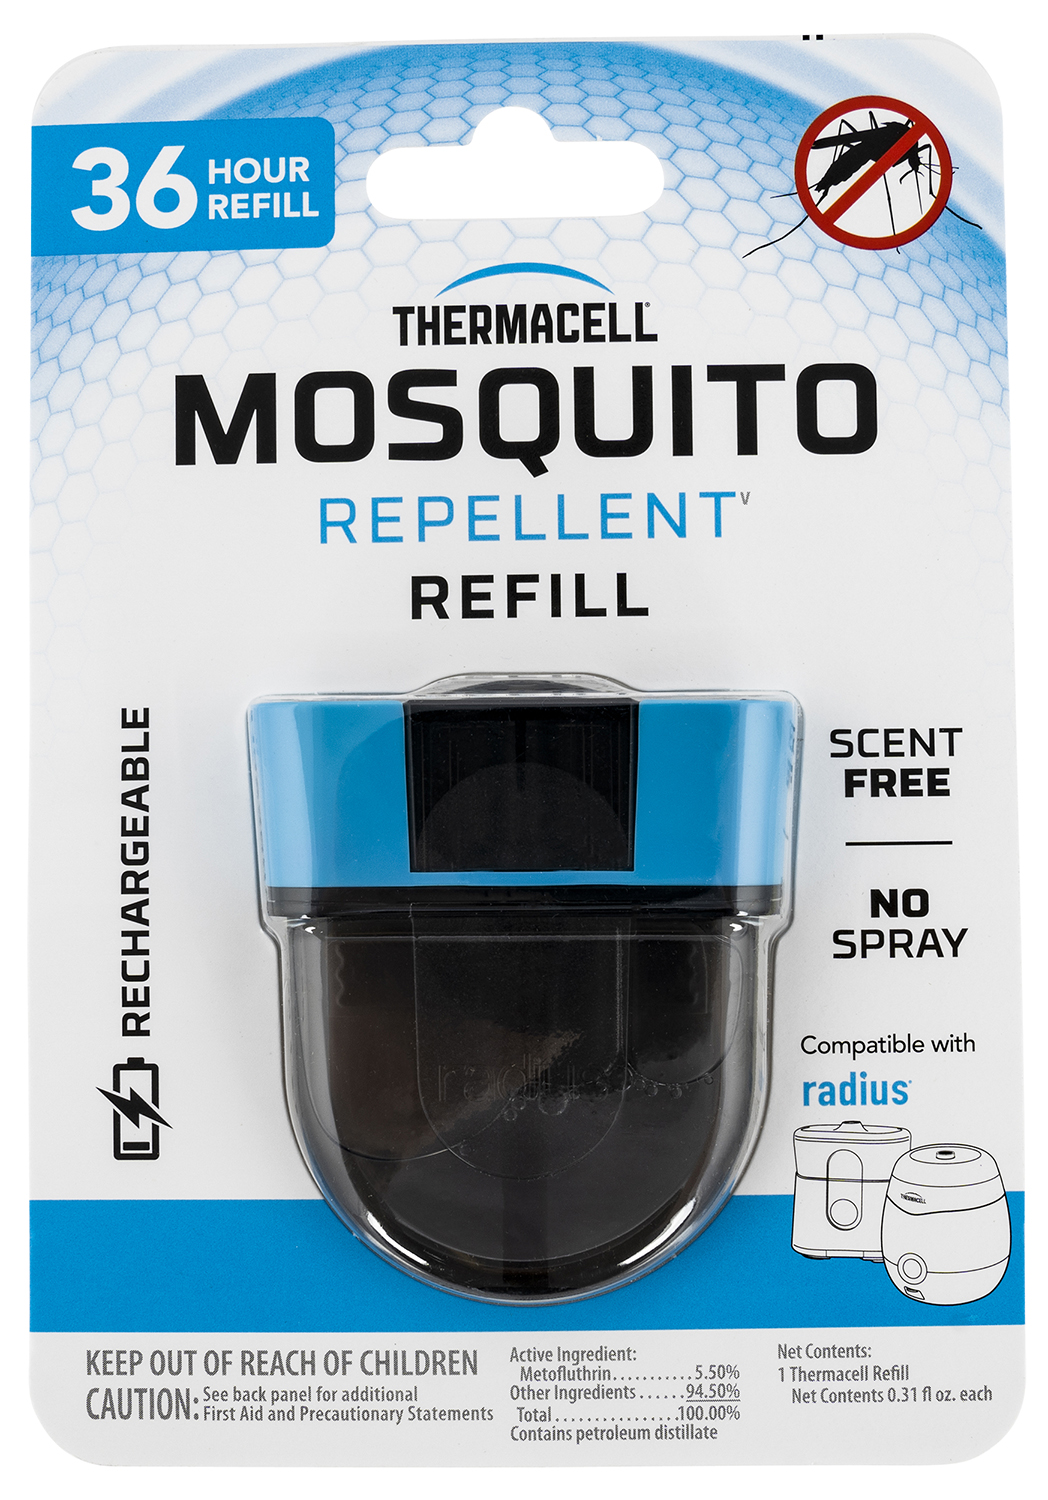 THERMACELL REPELLENT REFILL E55 SERIES 36 HOUR